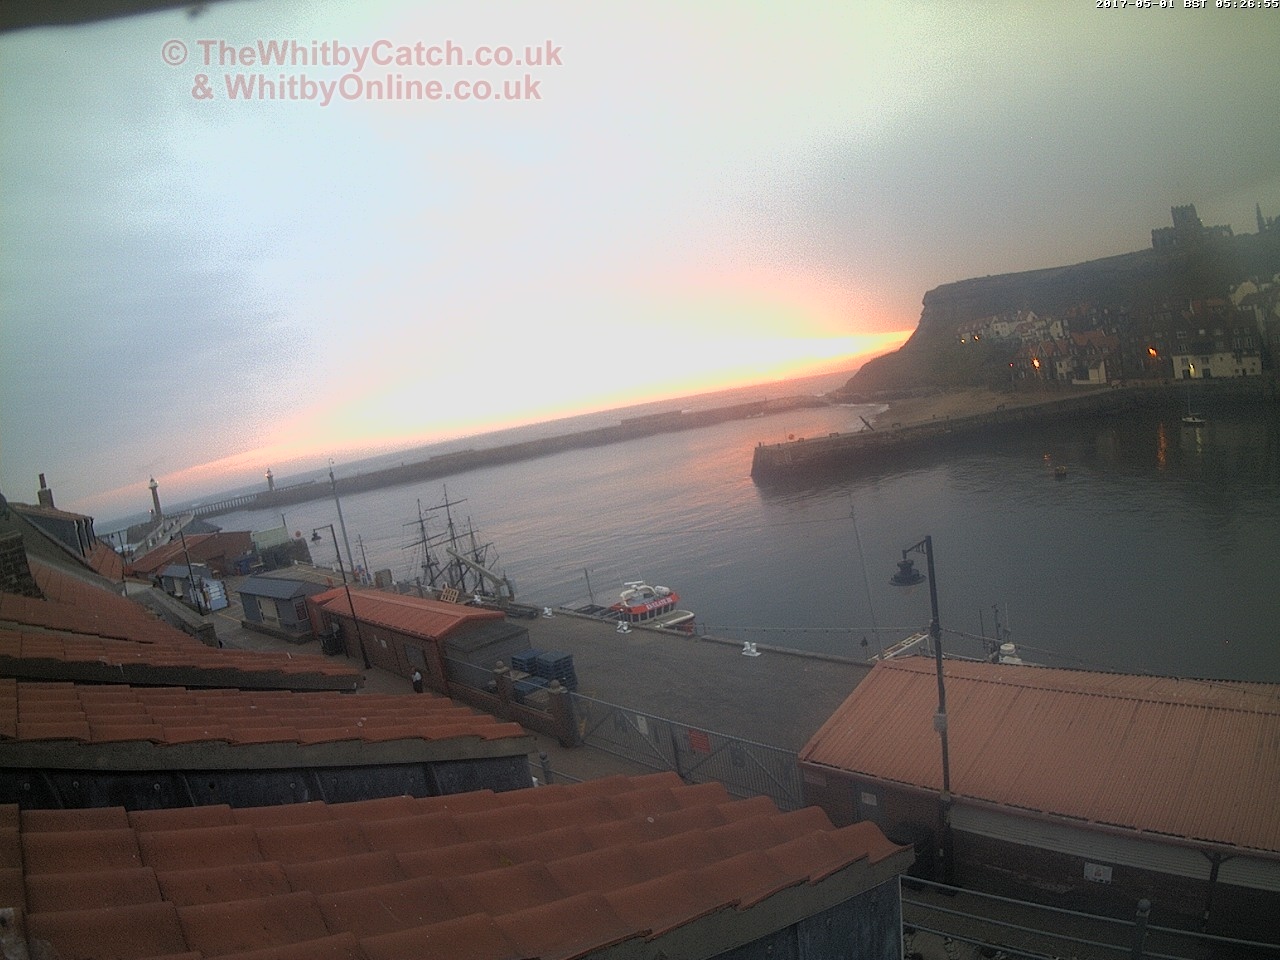 Whitby Mon 1st May 2017 05:27.